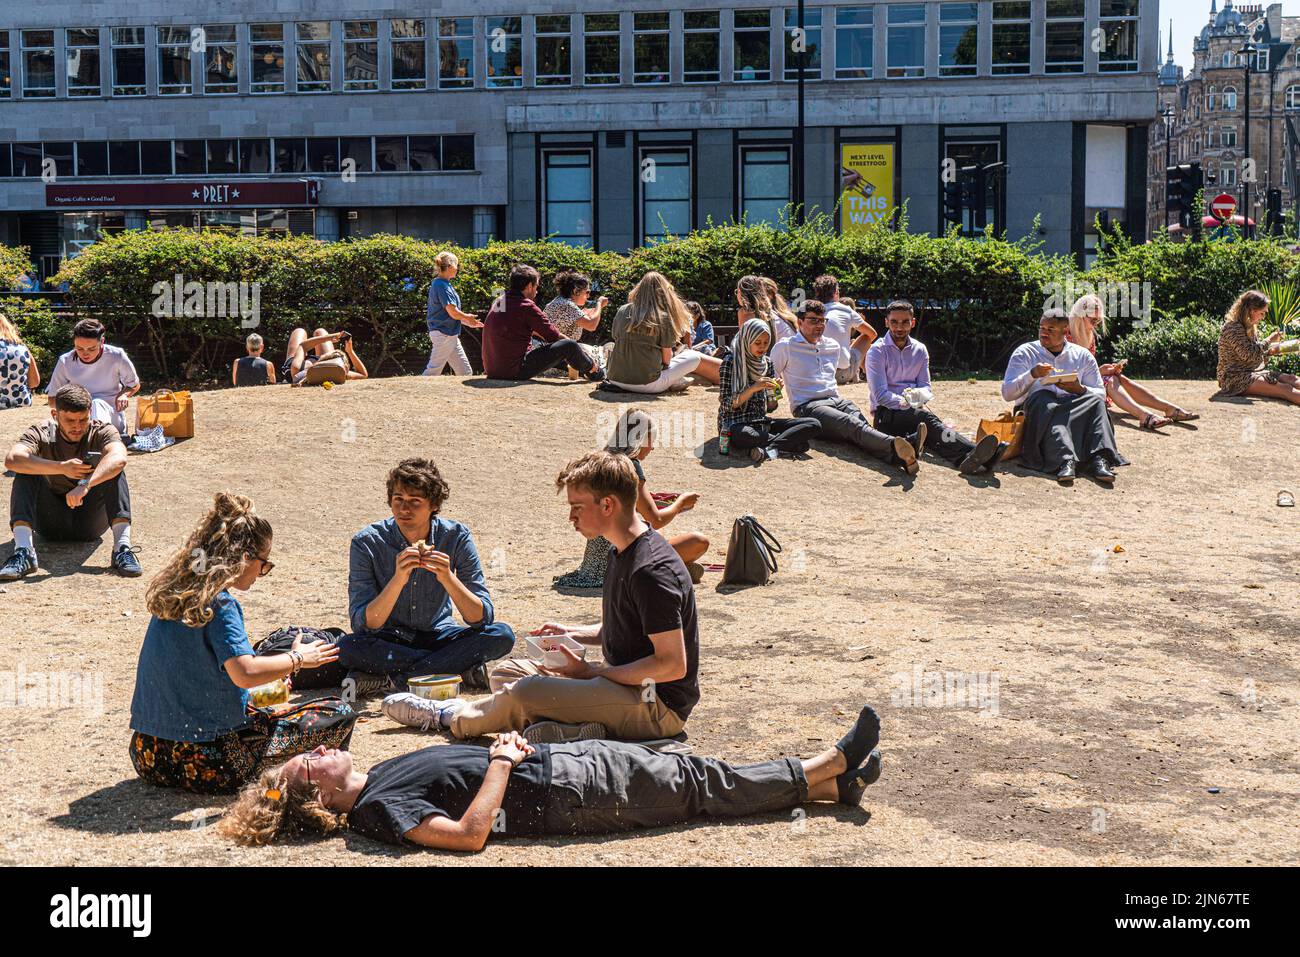 London, UK. 9 August 2022   Office workers enjoying the sunshine on the parched grass in Cavendish square London. The Uk health security agency has issued a warning as England is placed on a level 3 health alert  temperatures are expected to soar to mid 30's celsius for the next week.   Credit. amer ghazzal/Alamy Live News Stock Photo